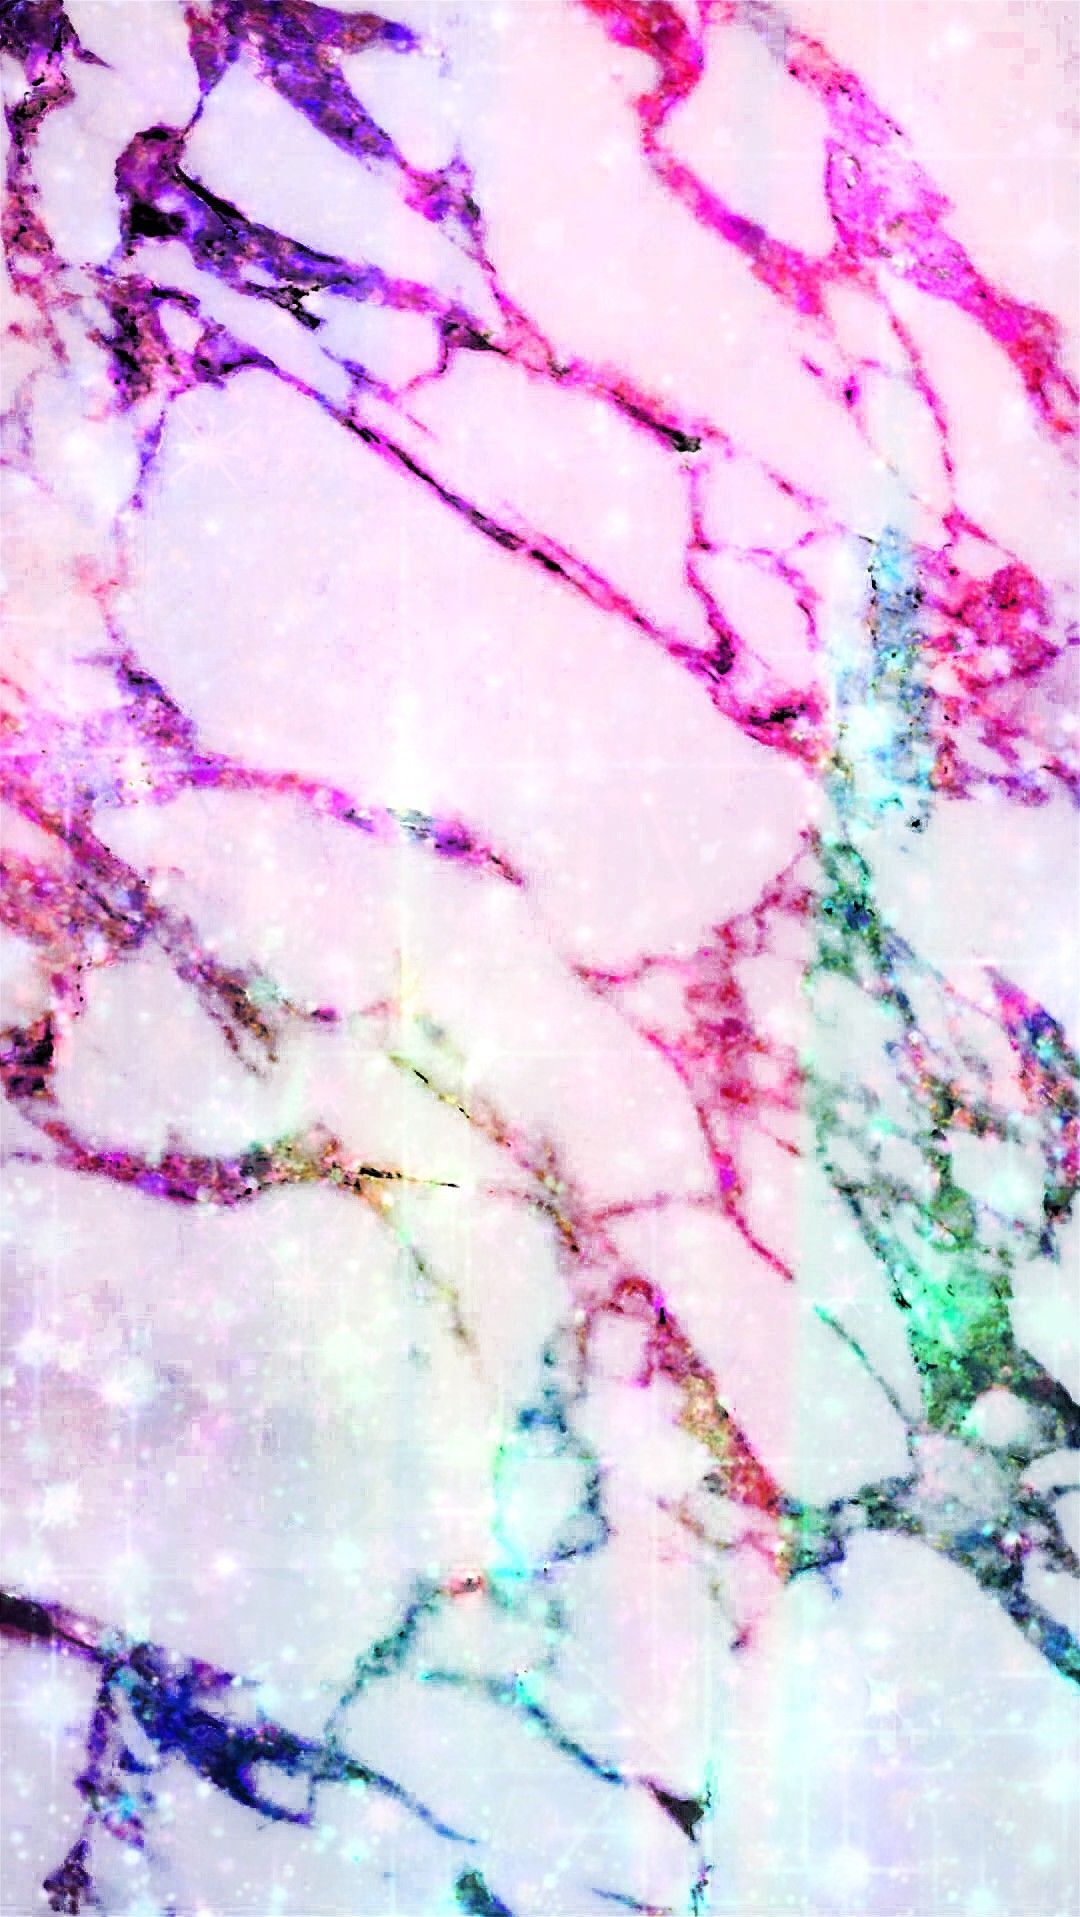 Colorful Marble Galaxy, made by me #textures #colorful #glitter #galaxy # wallpaper #background #color #marbl. Rainbow marble, Colorful glitter, Galaxy wallpaper